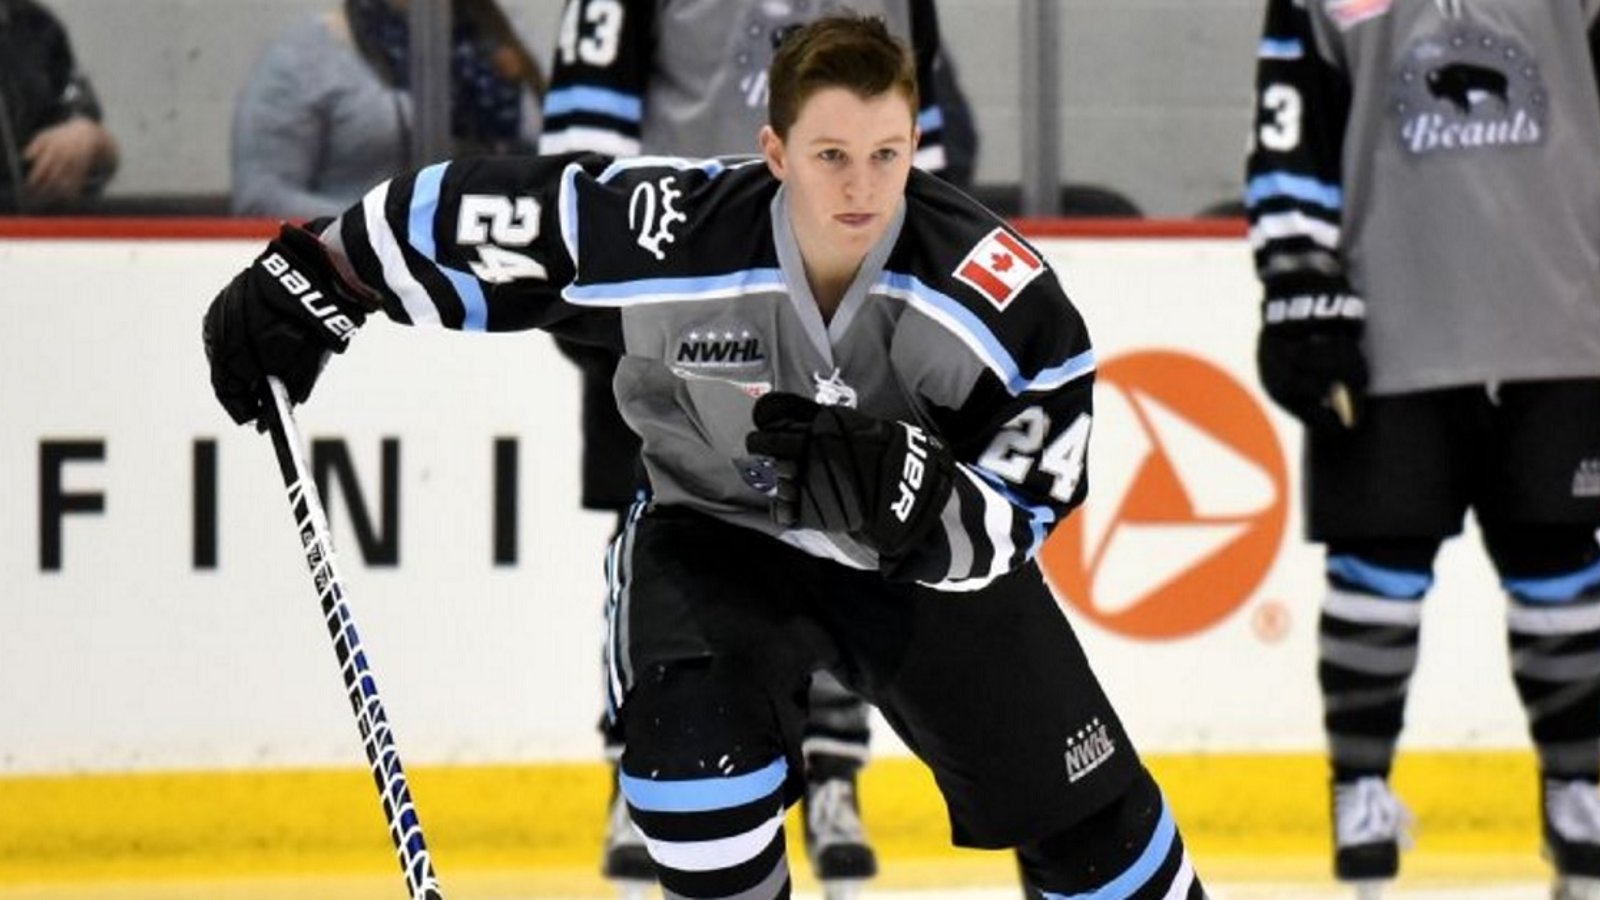 Hockey player comes out as the first transgender athlete in U.S. team sports.